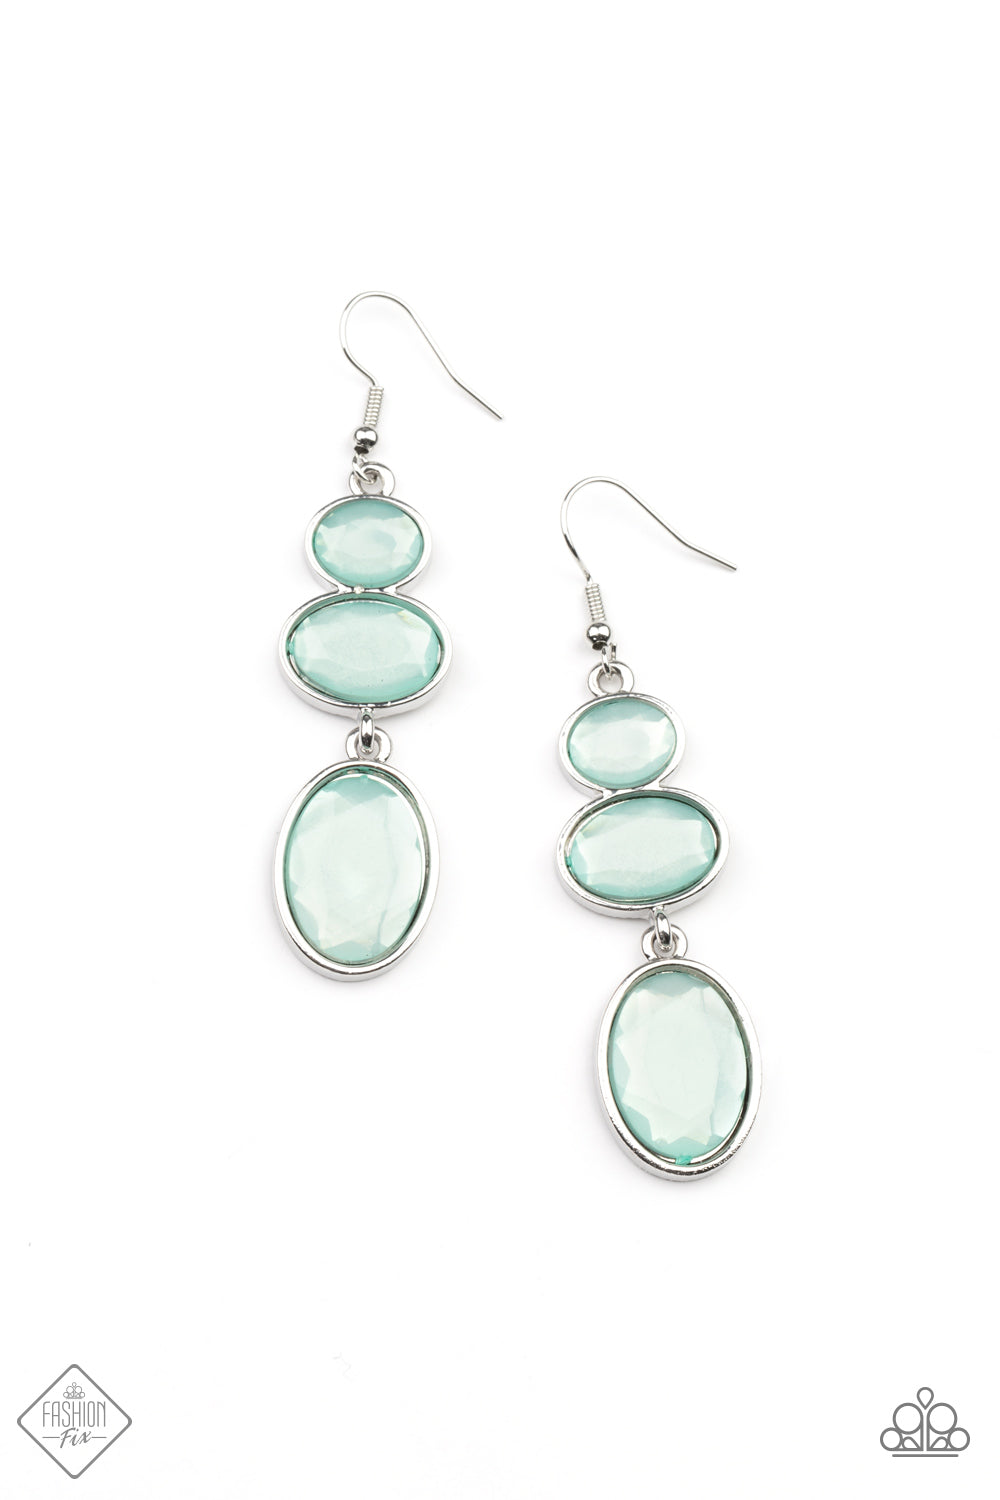 Paparazzi Accessories Tiers Of Tranquility - Fashion Fix Earrings